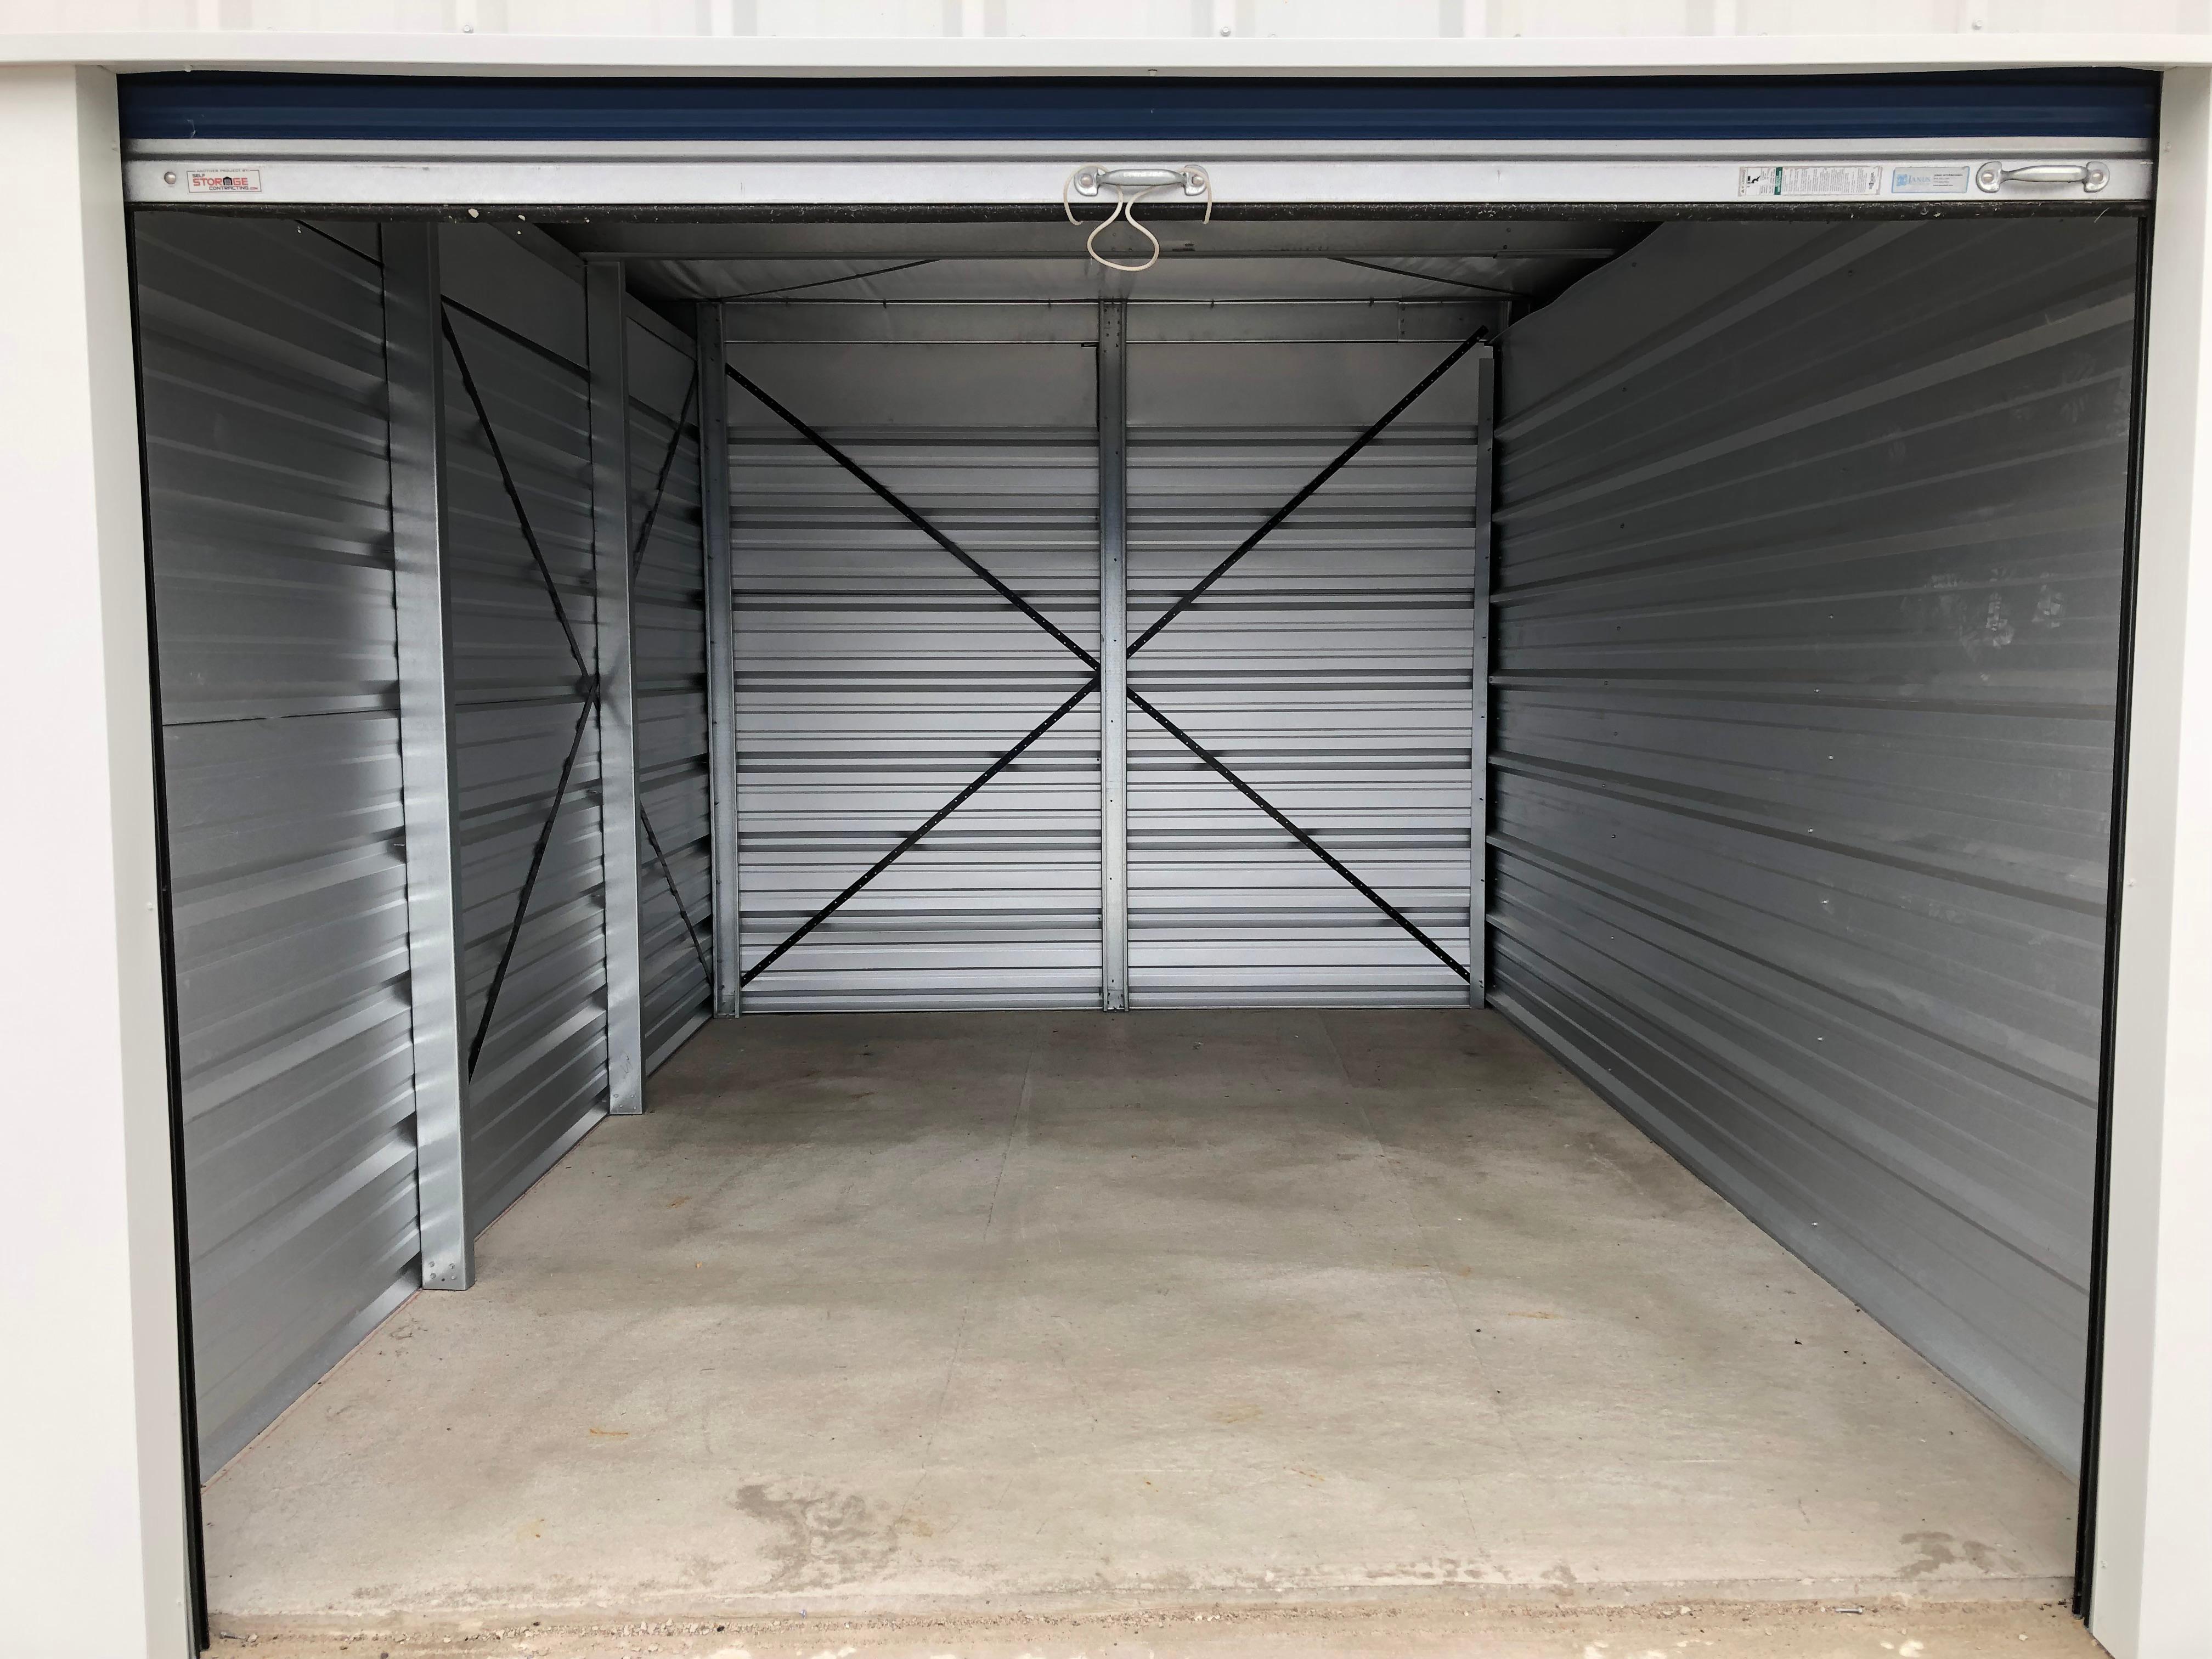 Access Storage - Barrie Mapleview Barrie (705)809-3314